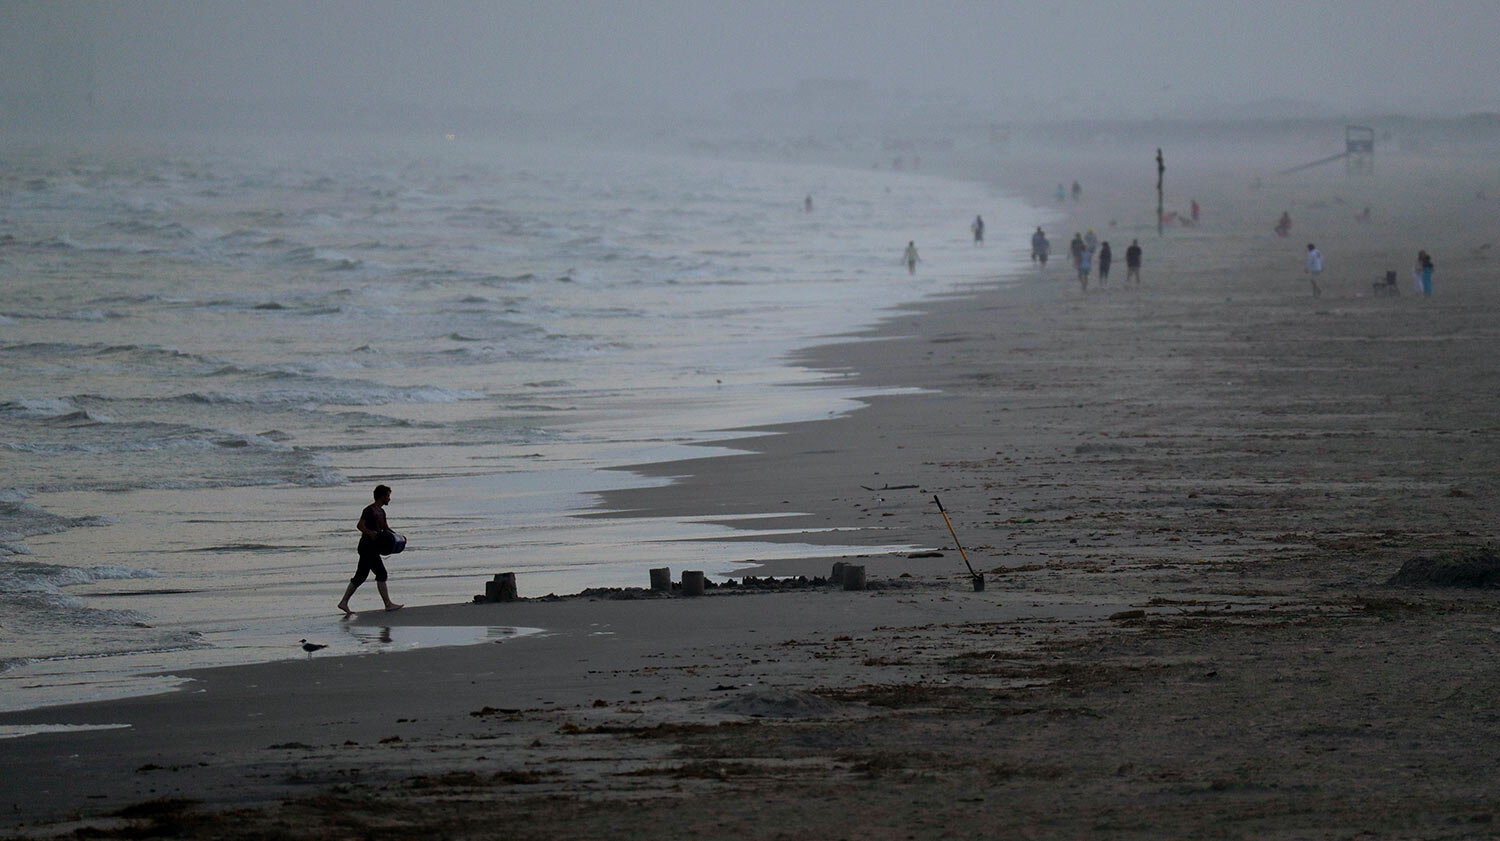  Beach goers are scattered along the water front, March 22, 2020, in Port Aransas, Texas. Officials have strongly discouraged large gatherings of spring breakers on the beach due to the coronavirus outbreak. (AP Photo/Eric Gay) 